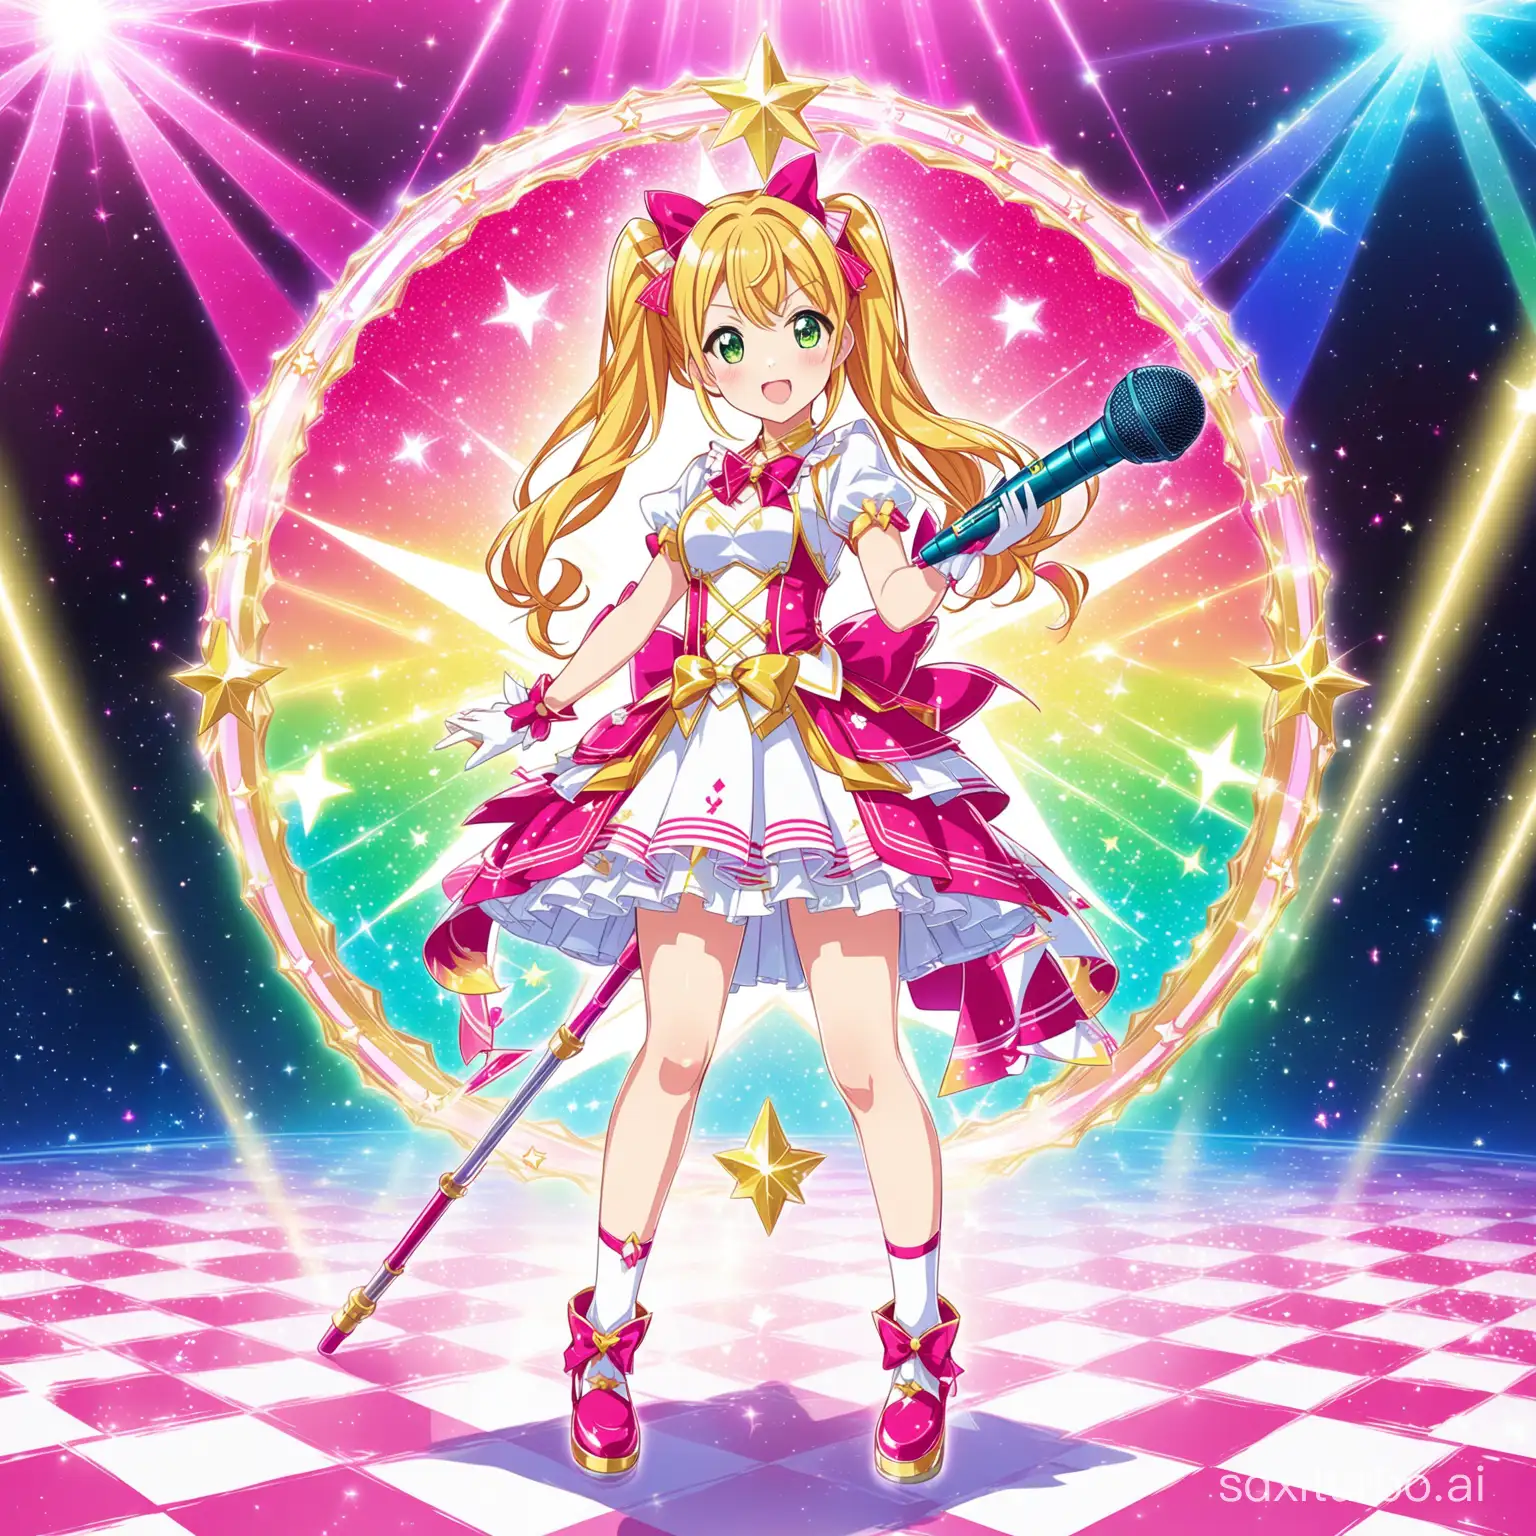 anime girl with a microphone and a microphone stand on a checkered floor, hololive, official artwork, sparkling magical girl, Macross Delta splash art, splash art anime loli, Idolmaster, !!full body portrait!!, Rin, Macross Delta, anime moe artstyle, Marin Kitagawa fanart, high resolution!!, official art, portrait of magical girl